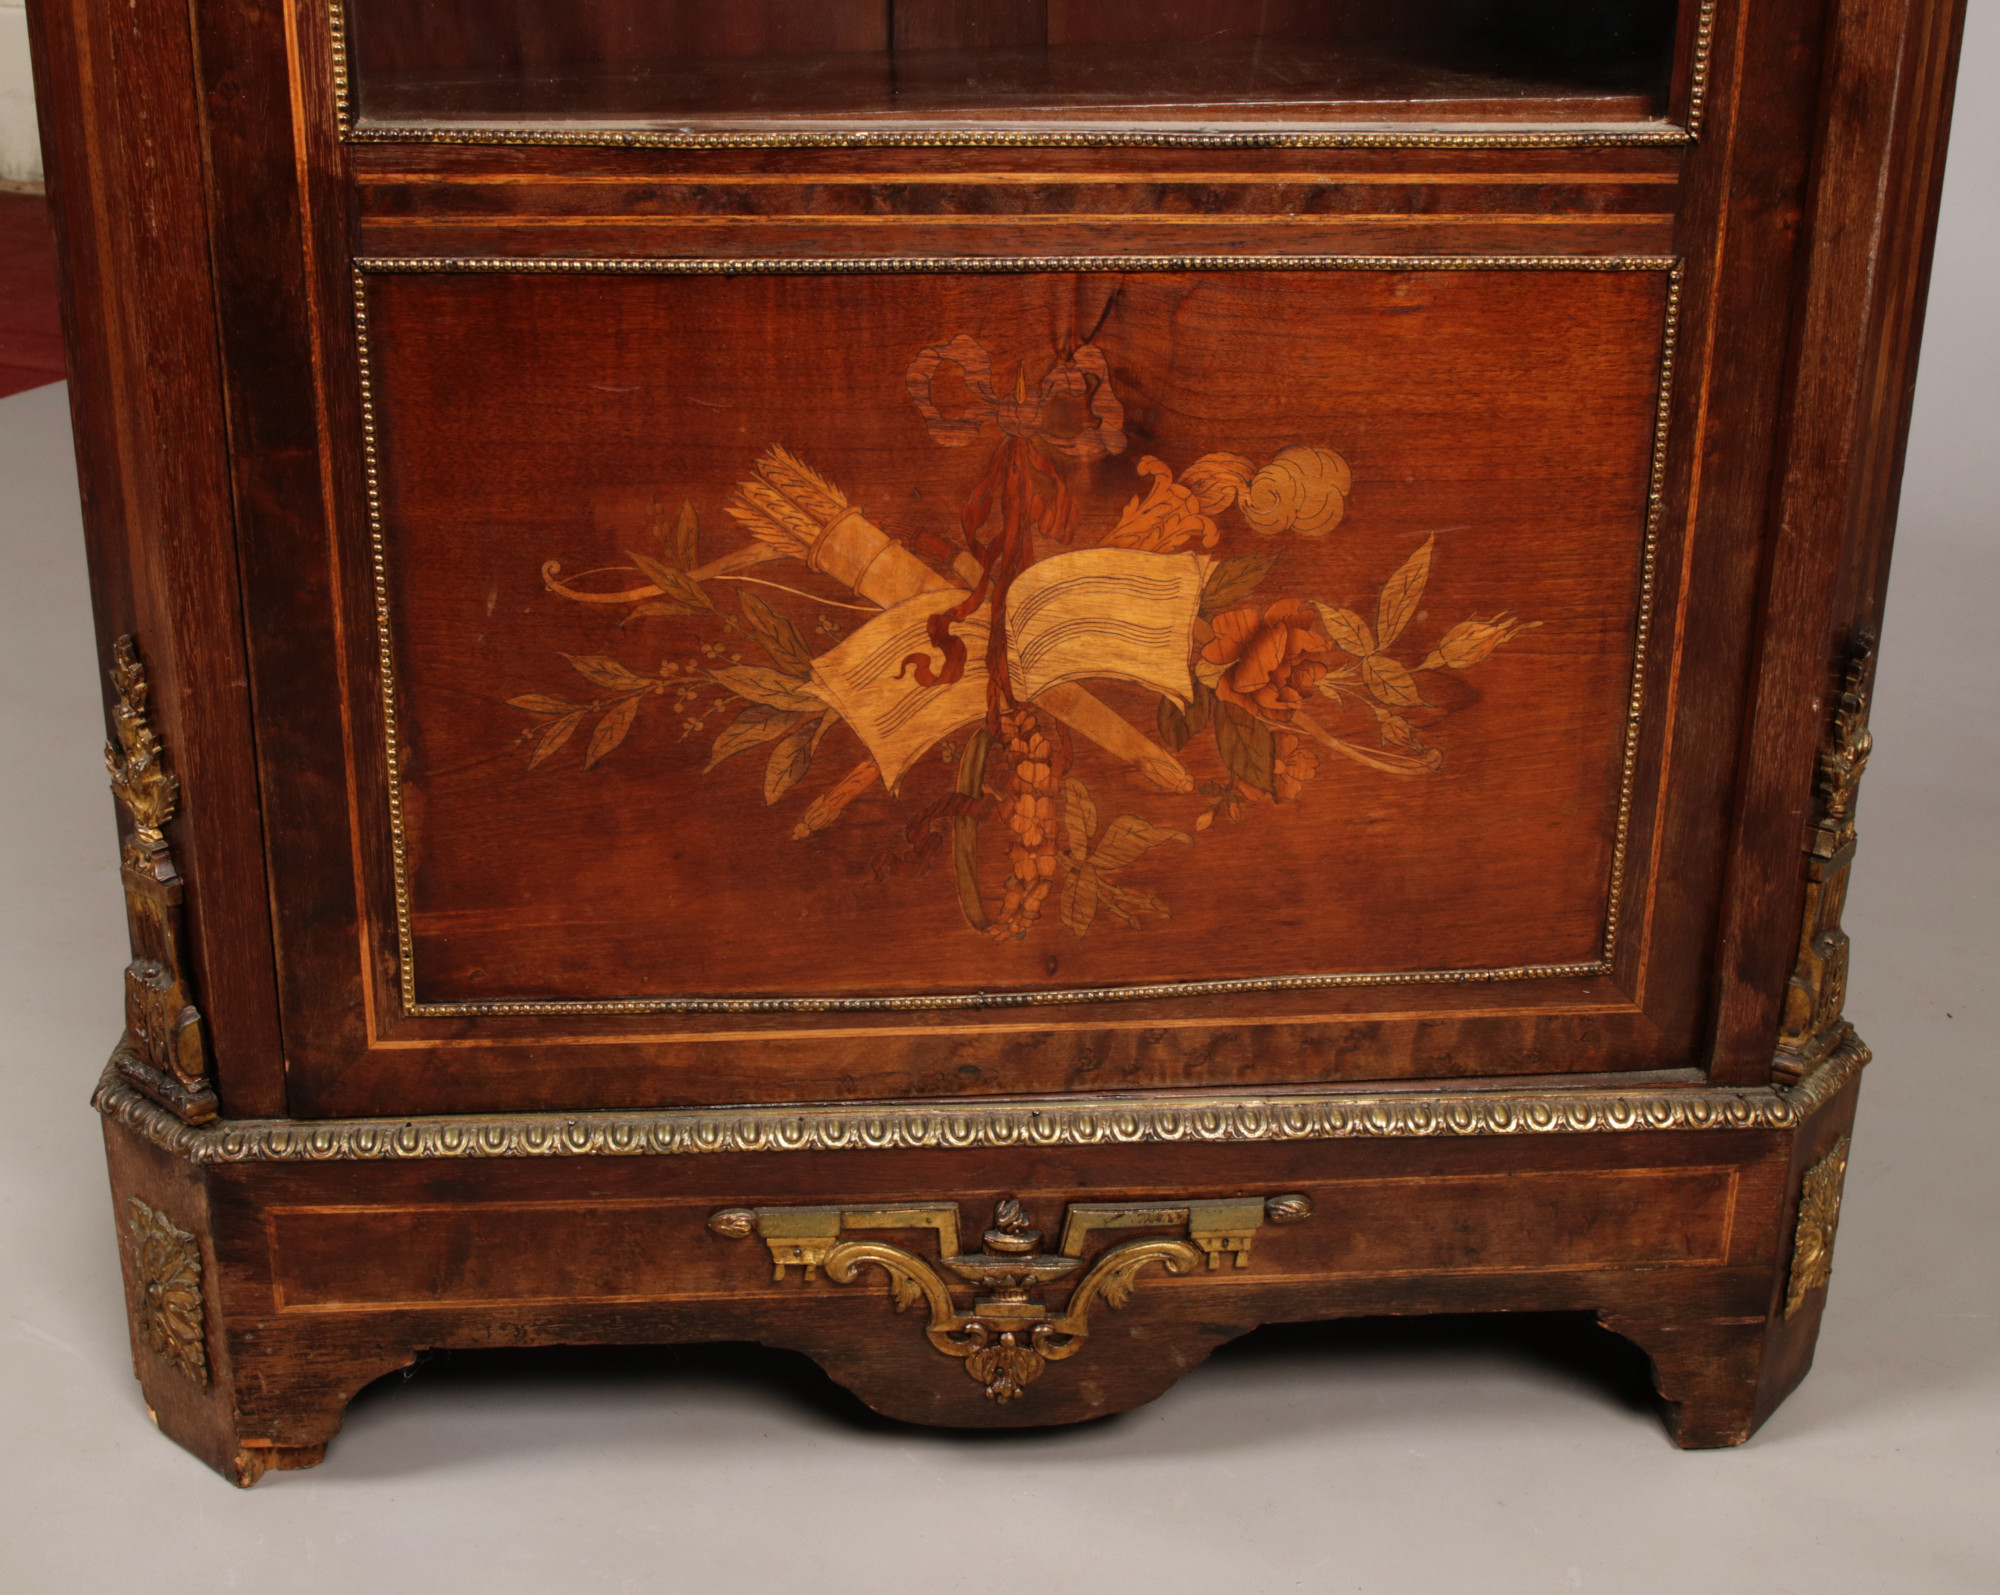 A 19th century mahogany marble top pier cabinet with gilt metal mounts. With marquetry inlay - Image 4 of 4